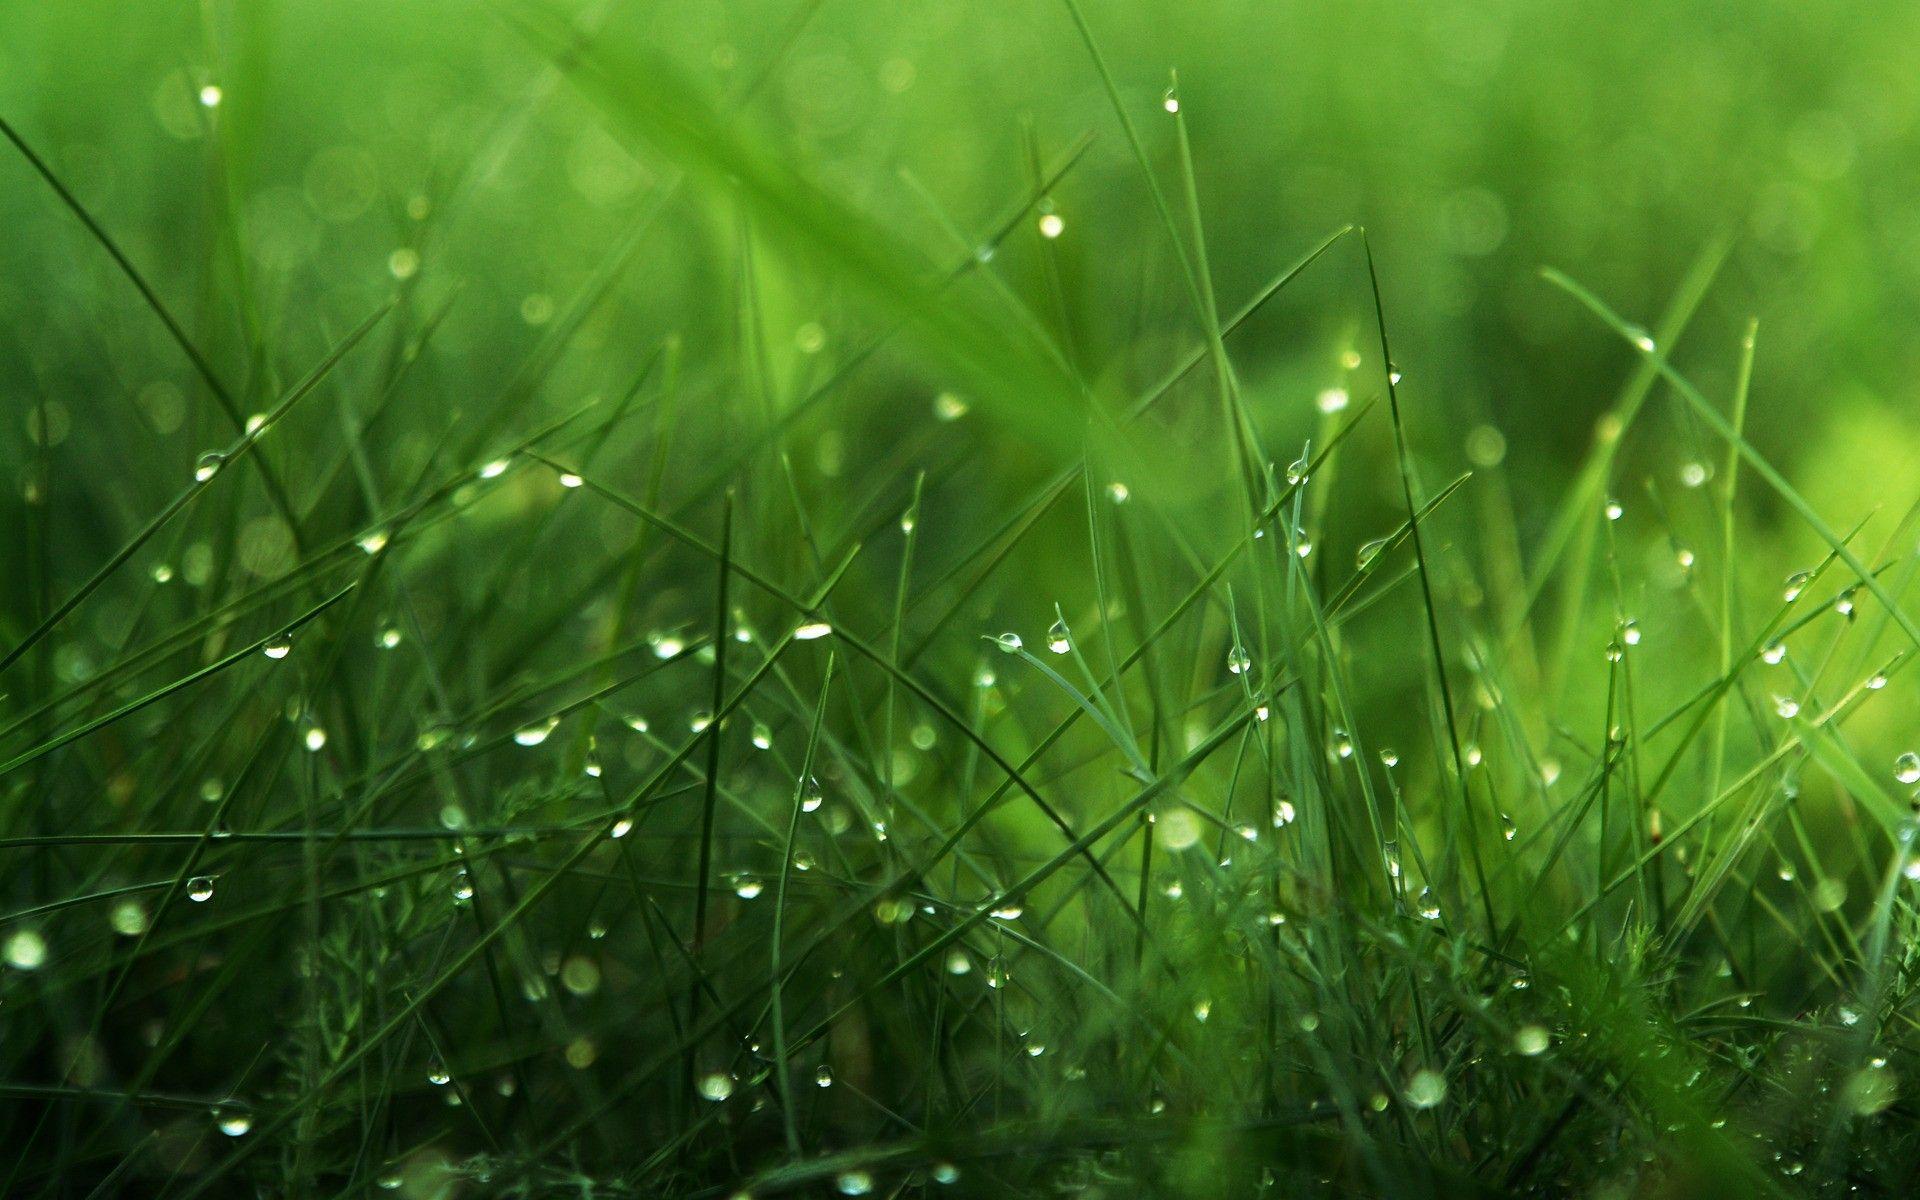 The grass in the morning dew wallpaper and image